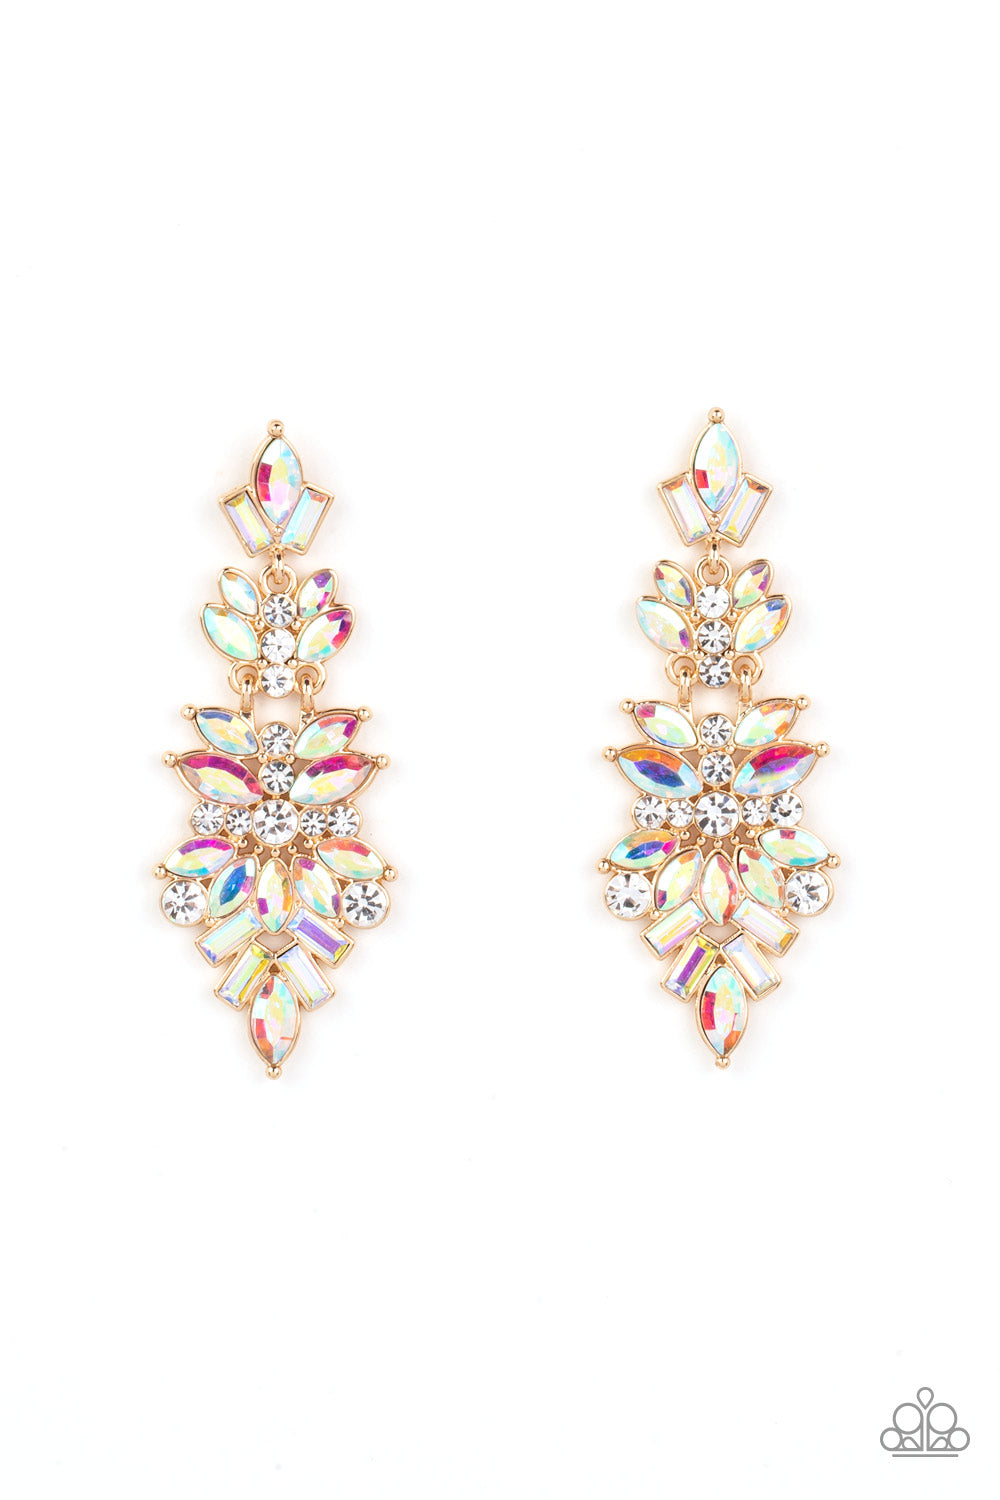 Paparazzi Accessories Frozen Fairytale - Multi Iridescent Rhinestone Earrings featuring white and iridescent finishes, trestles of round, marquise, and emerald cut rhinestones cluster into three sparkly segments as they link into a jaw-dropping lure. Earring attaches to a standard post fitting. Due to its prismatic palette, color may vary.  Sold as one pair of post earrings.